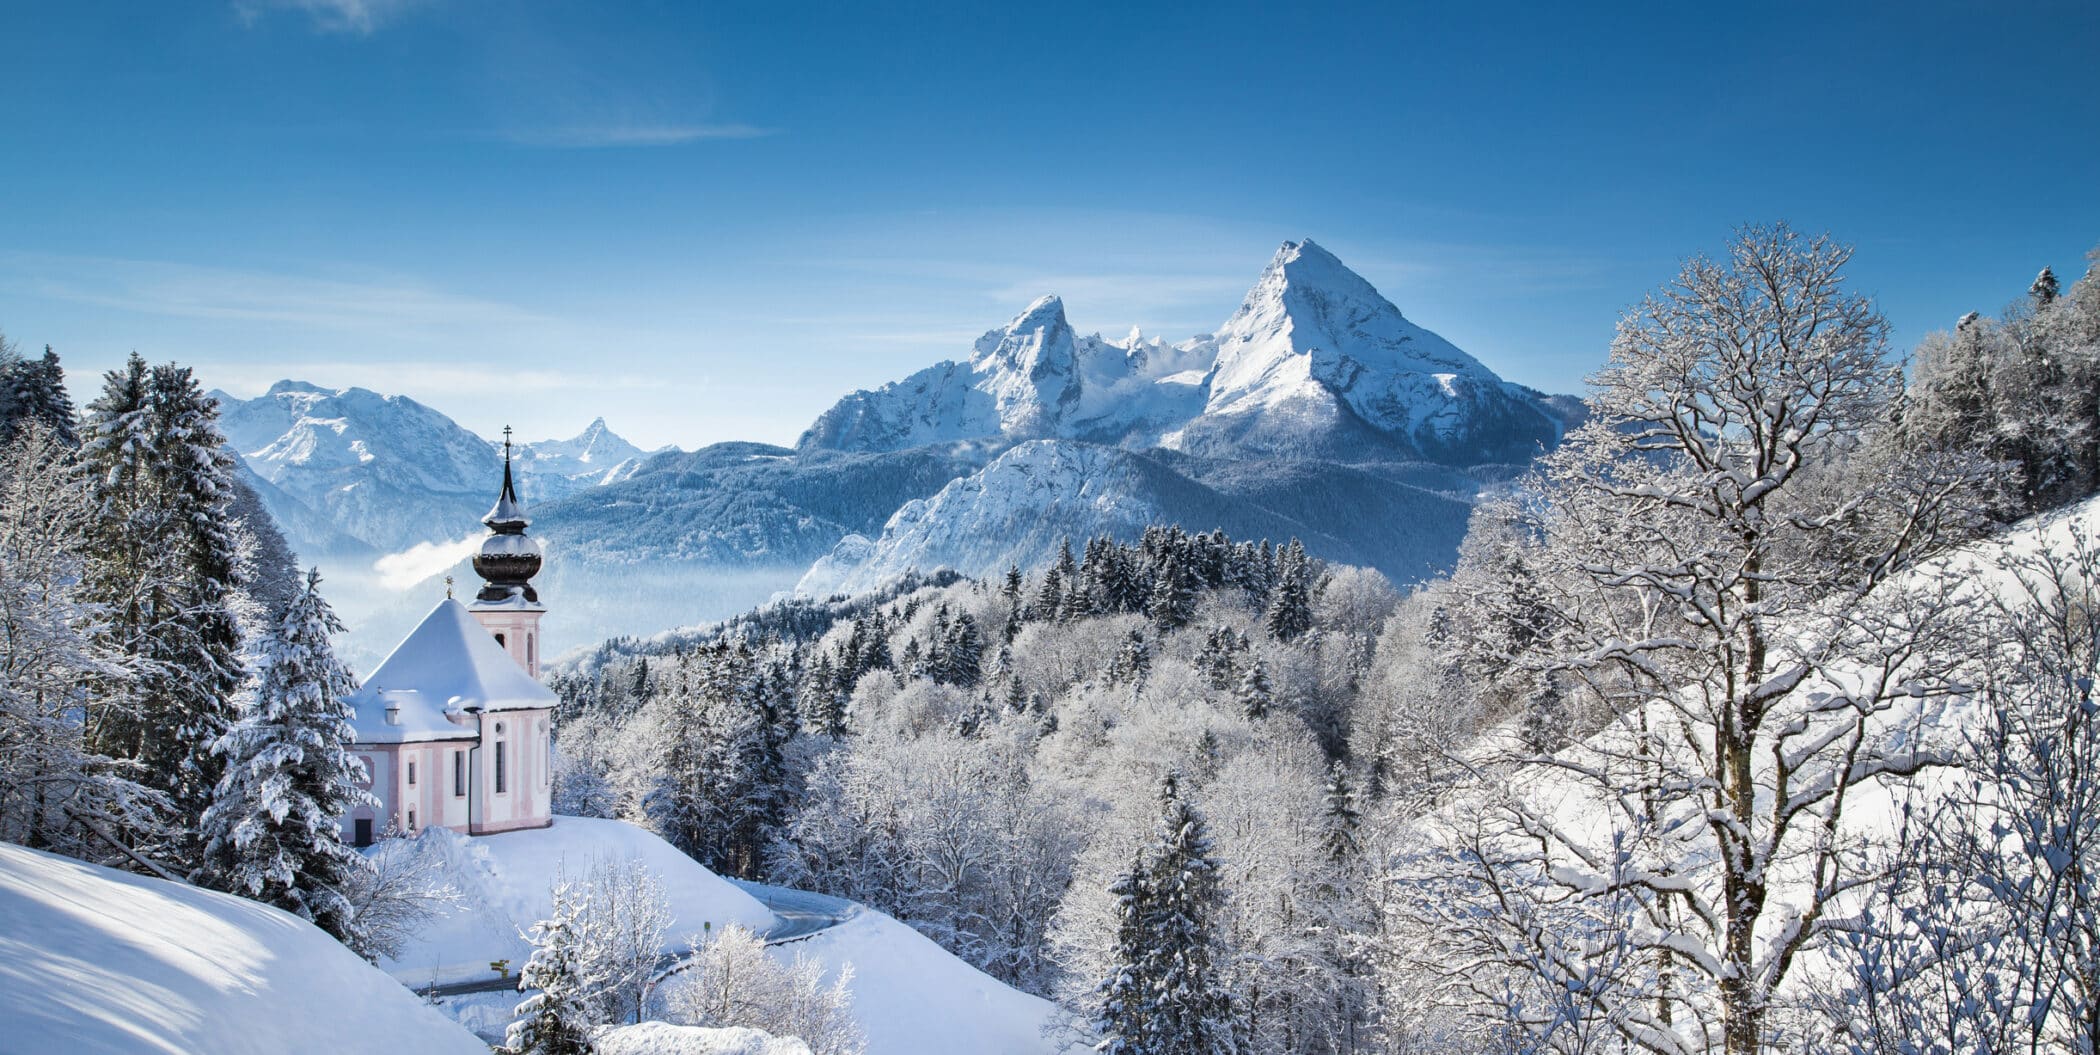 Panoramic view of beautiful winter landscape in the Bavarian Alps with pilgrimage church of Maria Gern and famous Watzmann massif in the background, Nationalpark Berchtesgadener Land, Bavaria, Germany.